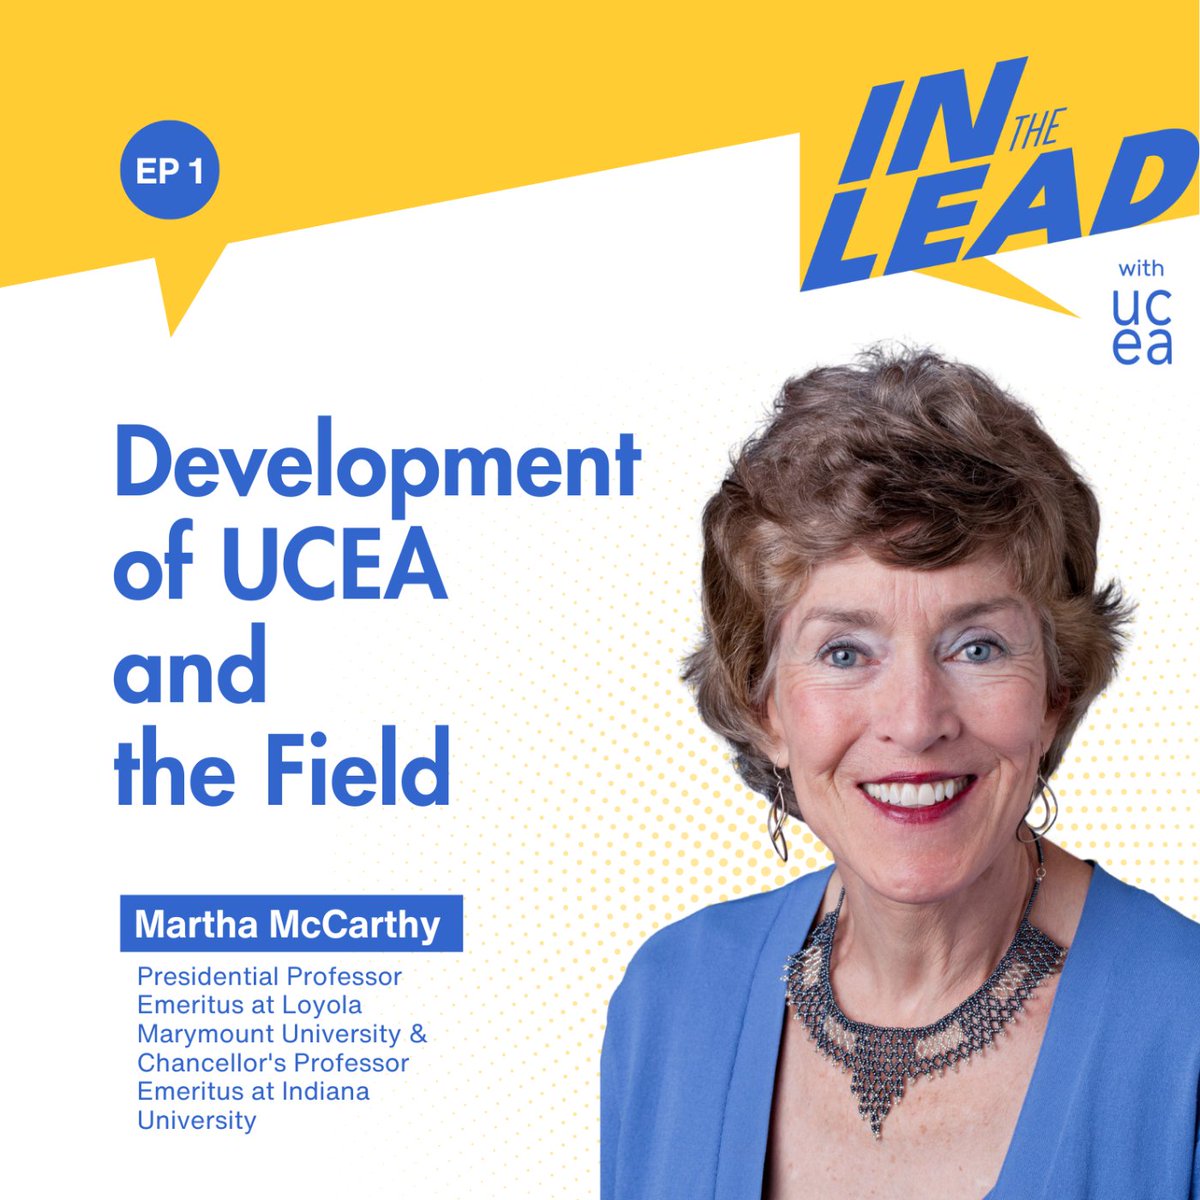 Kick-off S2 of #InTheLeadwithUCEA with an insightful conversation between Dr. Mónica Byrne-Jimenez and Dr. Martha McCarthy, exploring the evolution of educational leadership and UCEA’s pivotal role. #LeadershipMatters ow.ly/ieup50Rto2y